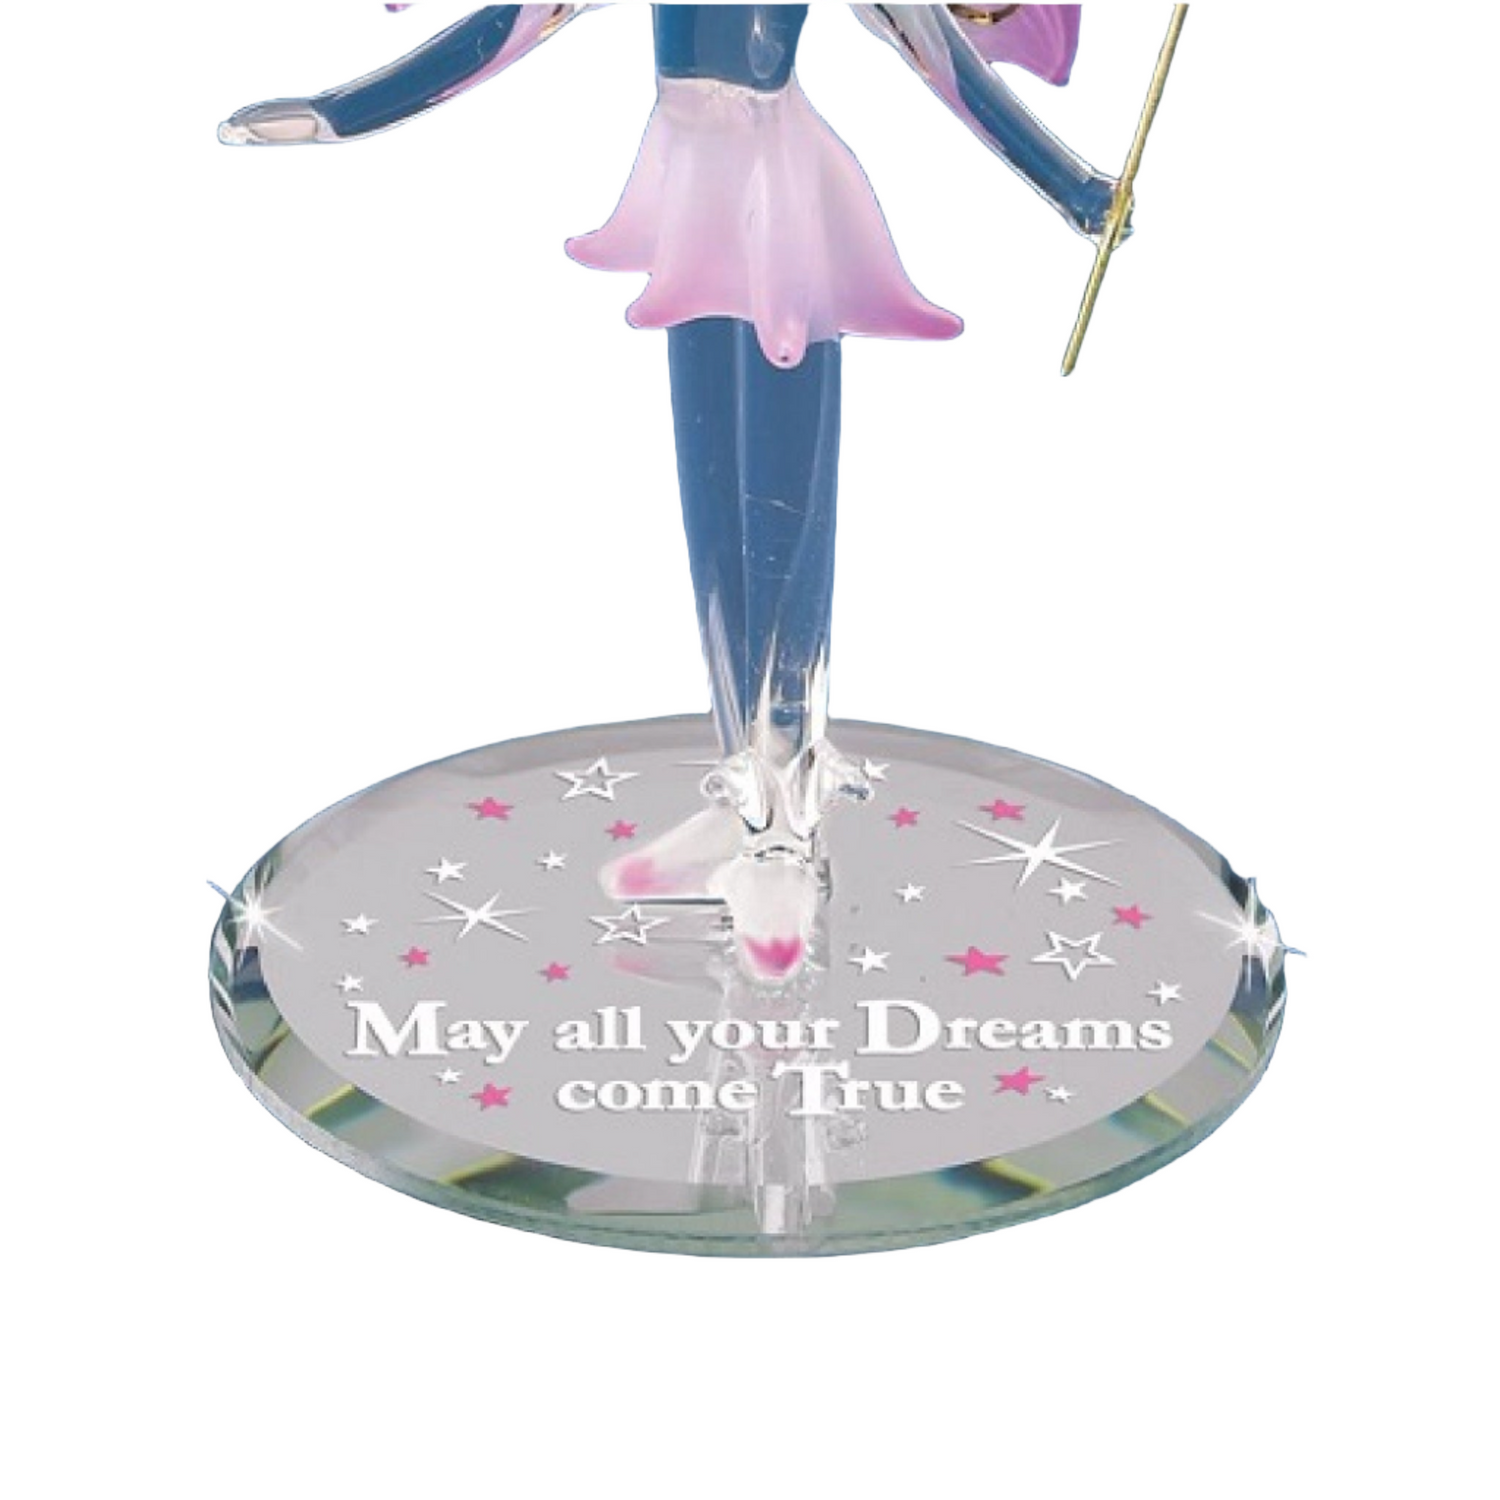 Glass Baron "May All Your Dreams" Fairy Figurine